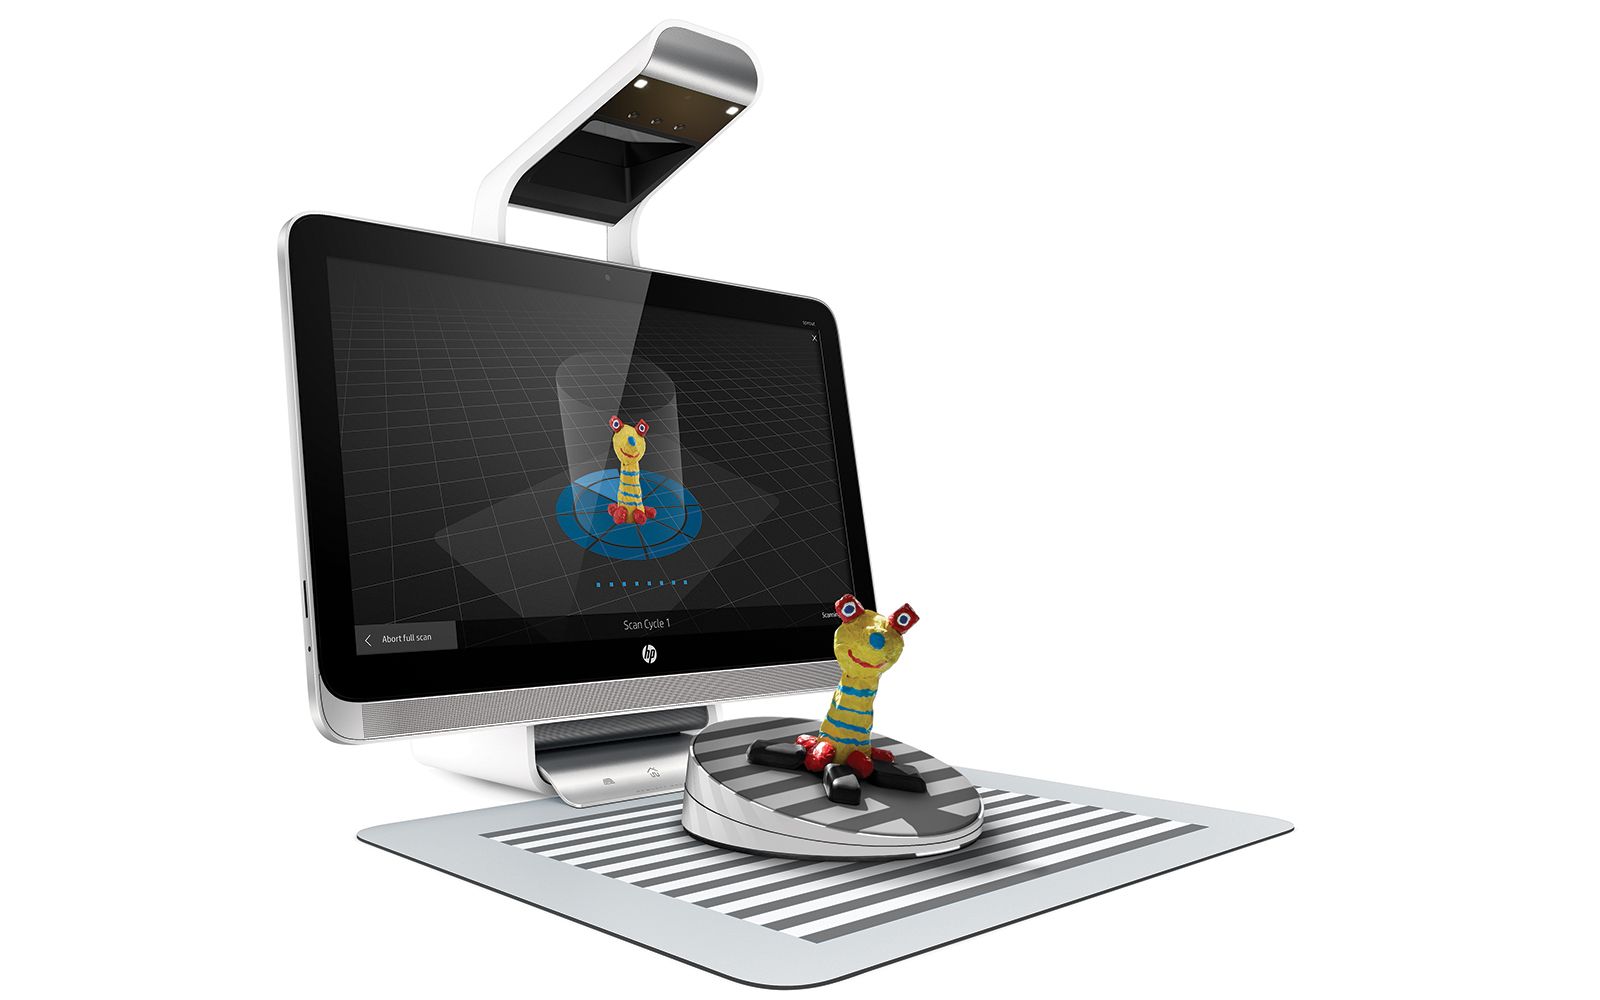 hp sprout can now 3d scan and print real world object cloning just got easy image 1